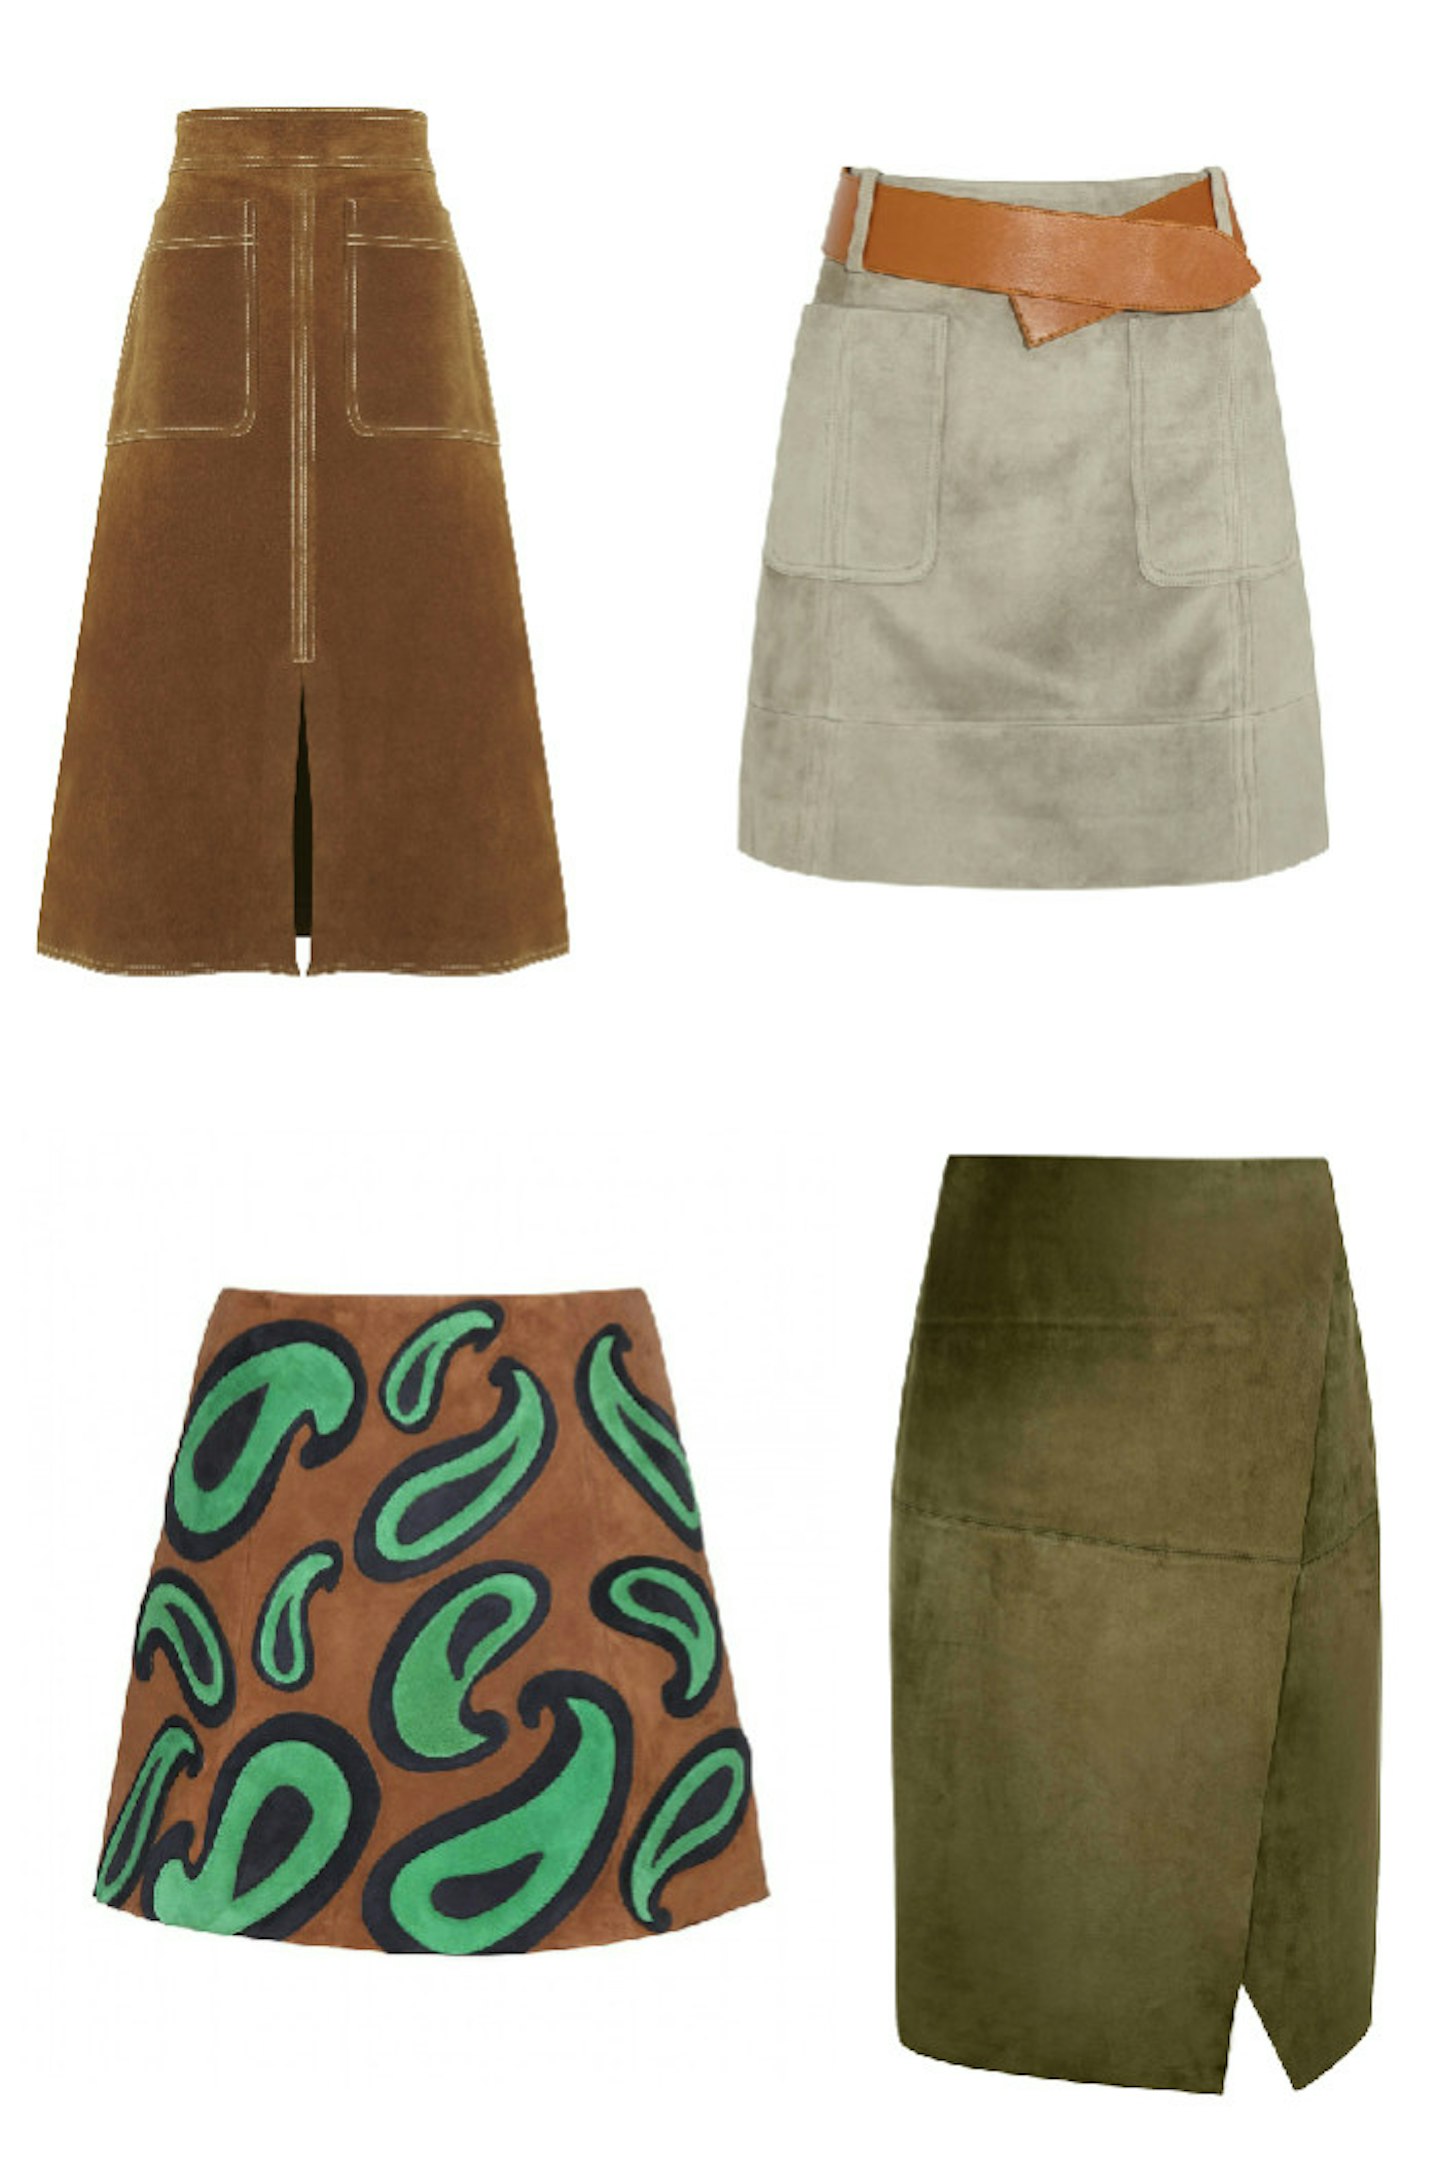 Gallery>>>>Click through to view the top 20 suede skirts...